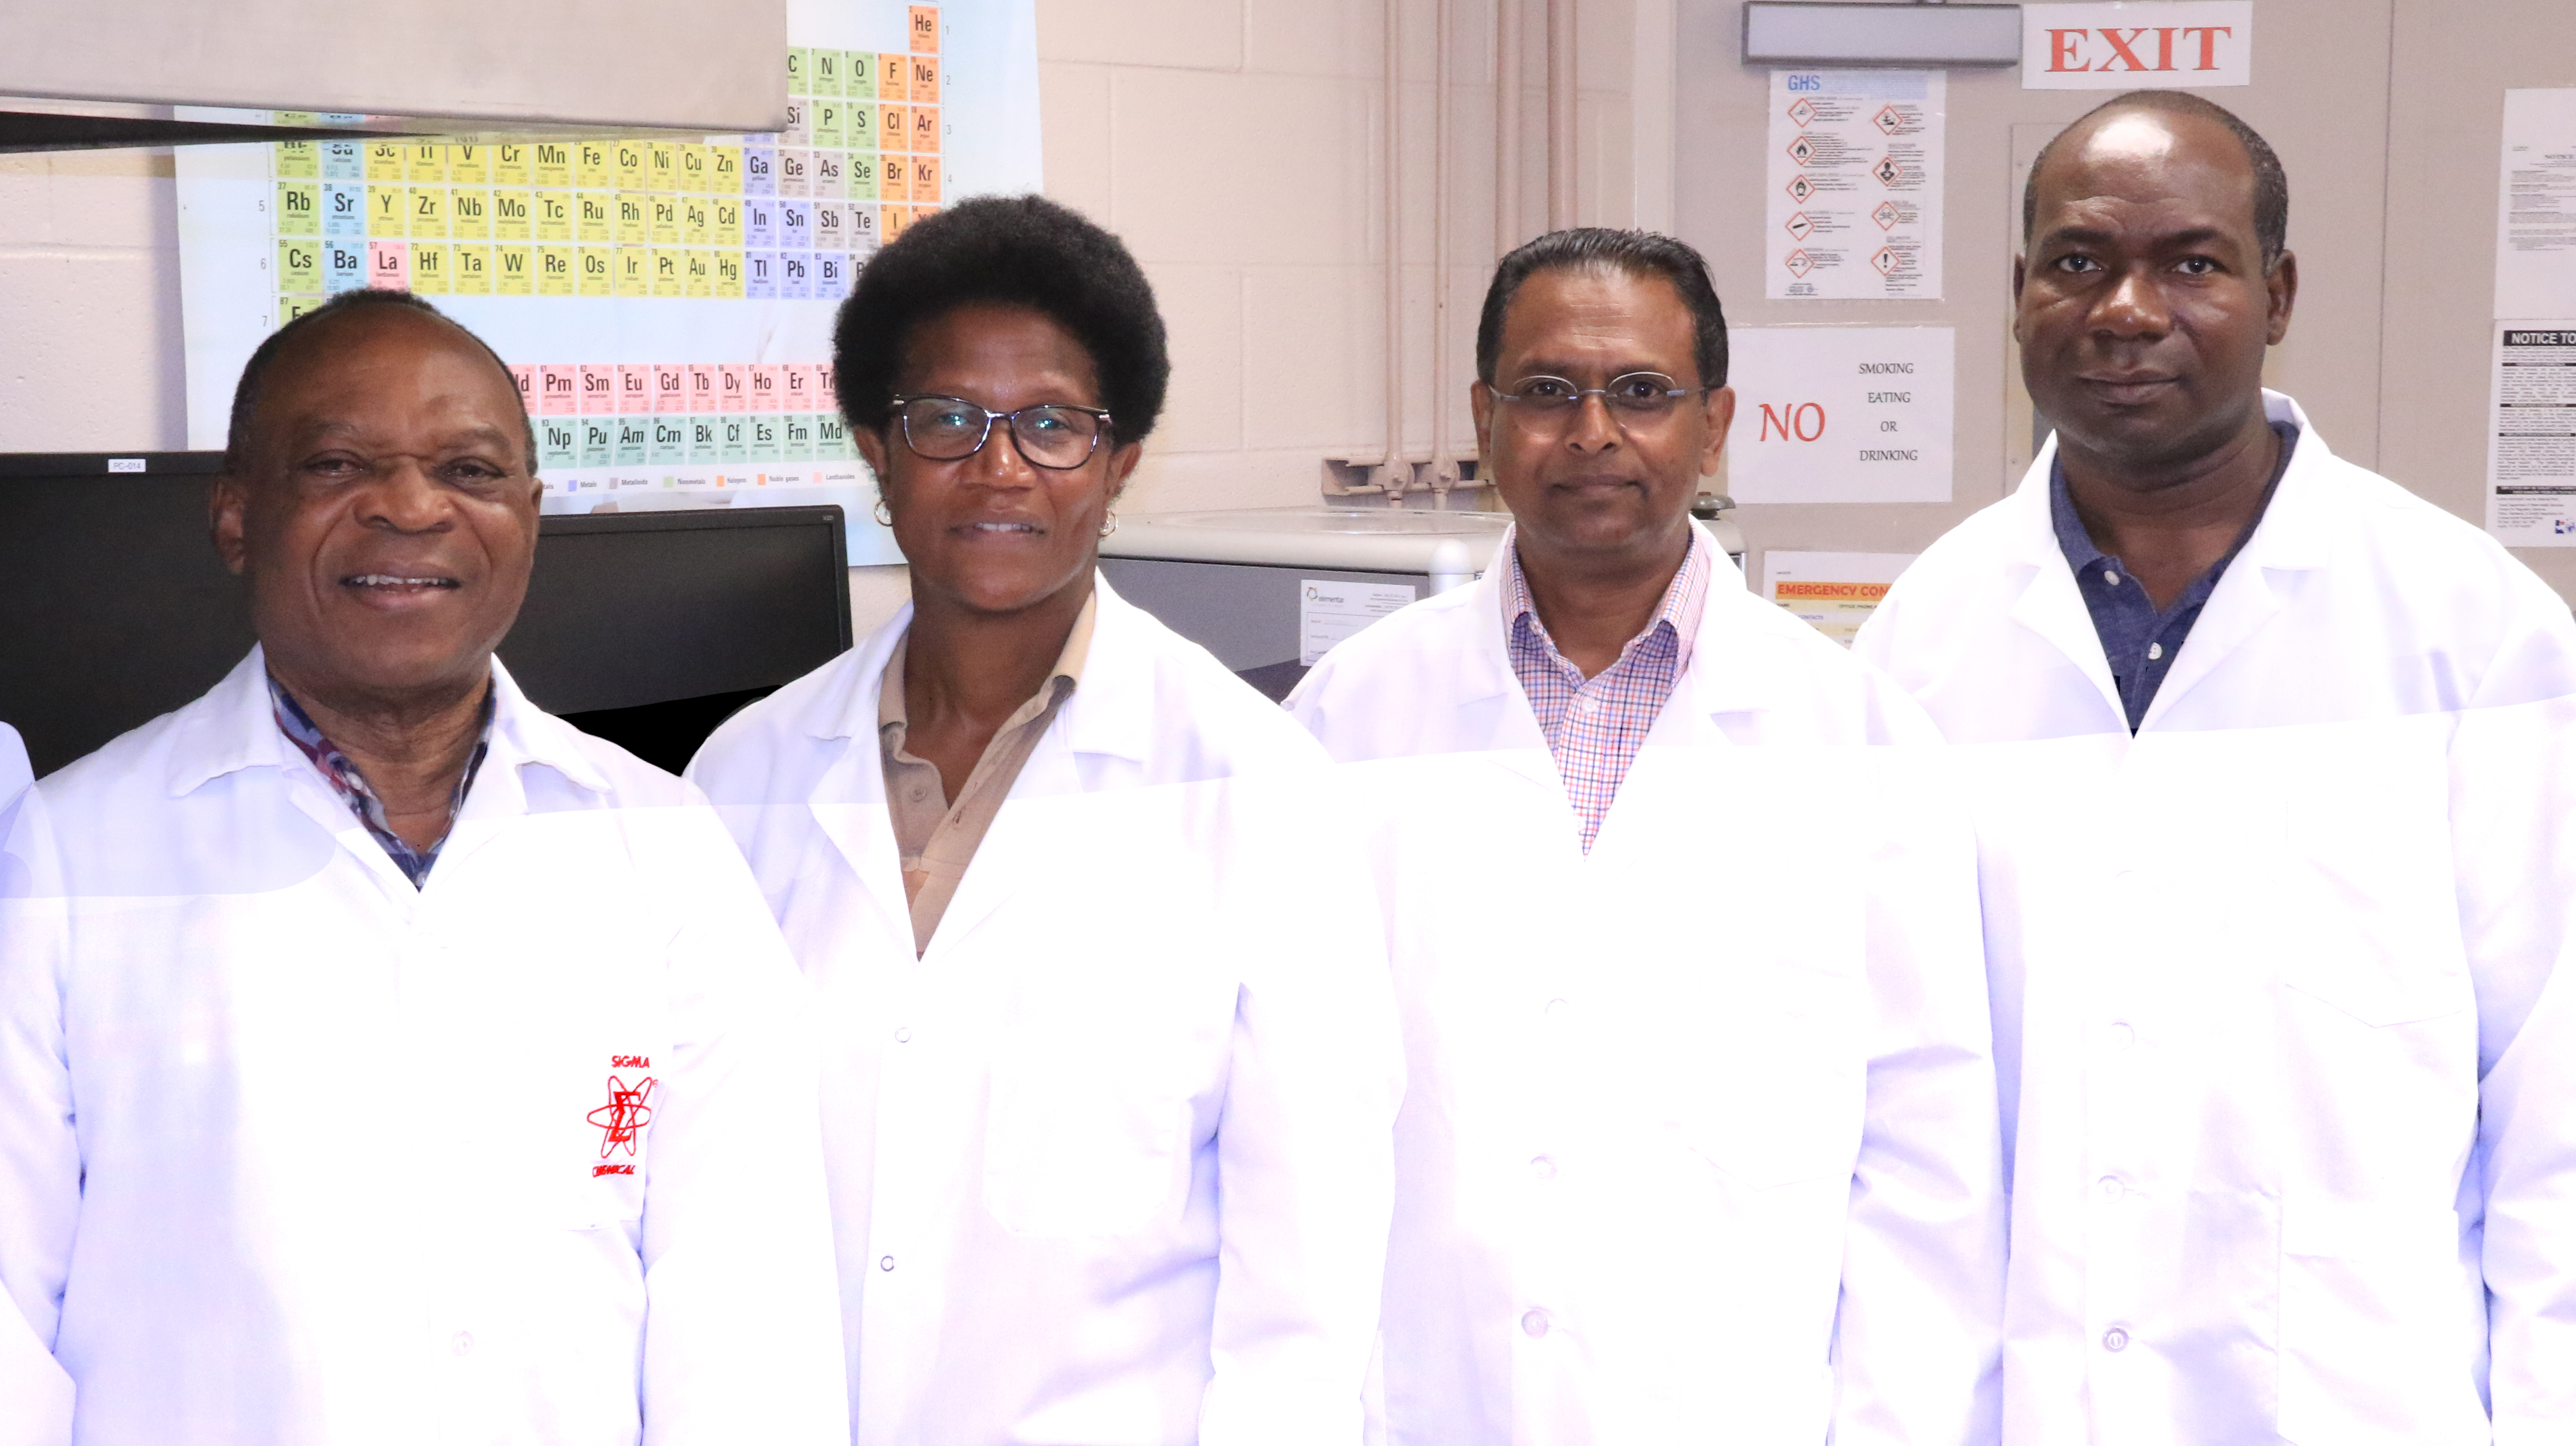 4 researchers in white coats